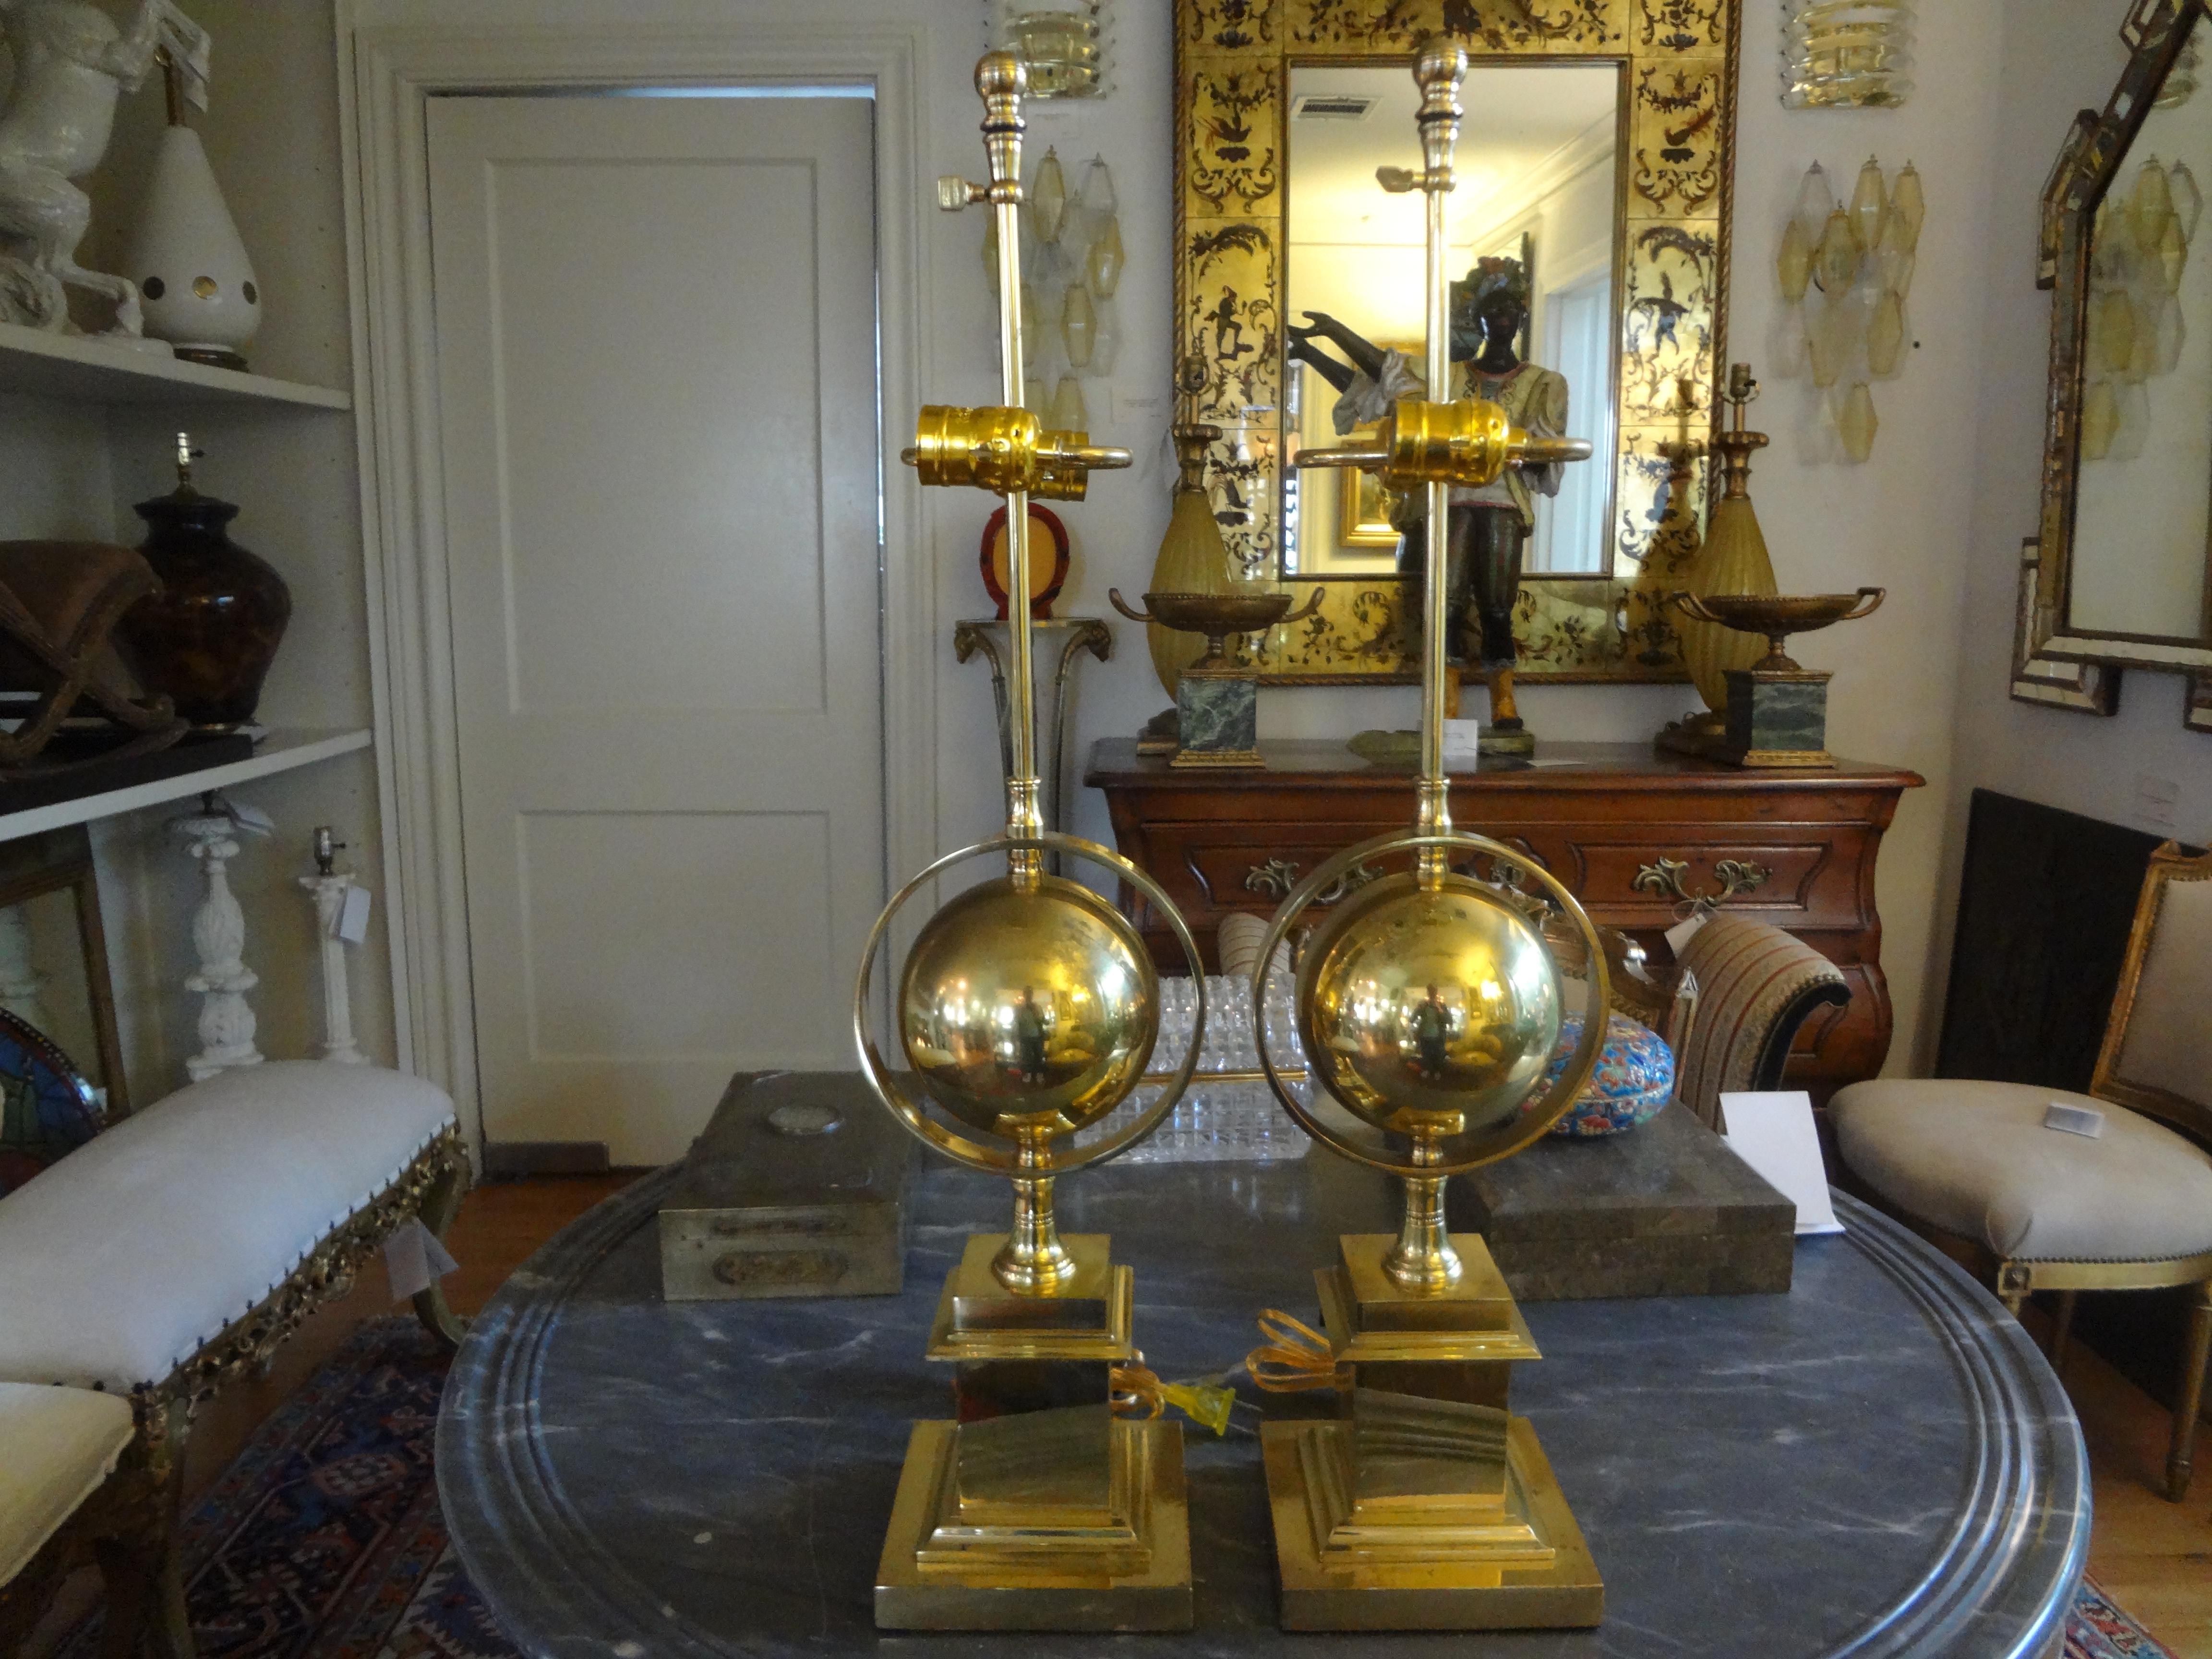 Great pair of midcentury Italian brass armillary lamps. These stunning vintage Hollywood Regency style Italian brass lamps have been newly wired for The U.S. Market with dual sockets and new inline switches.